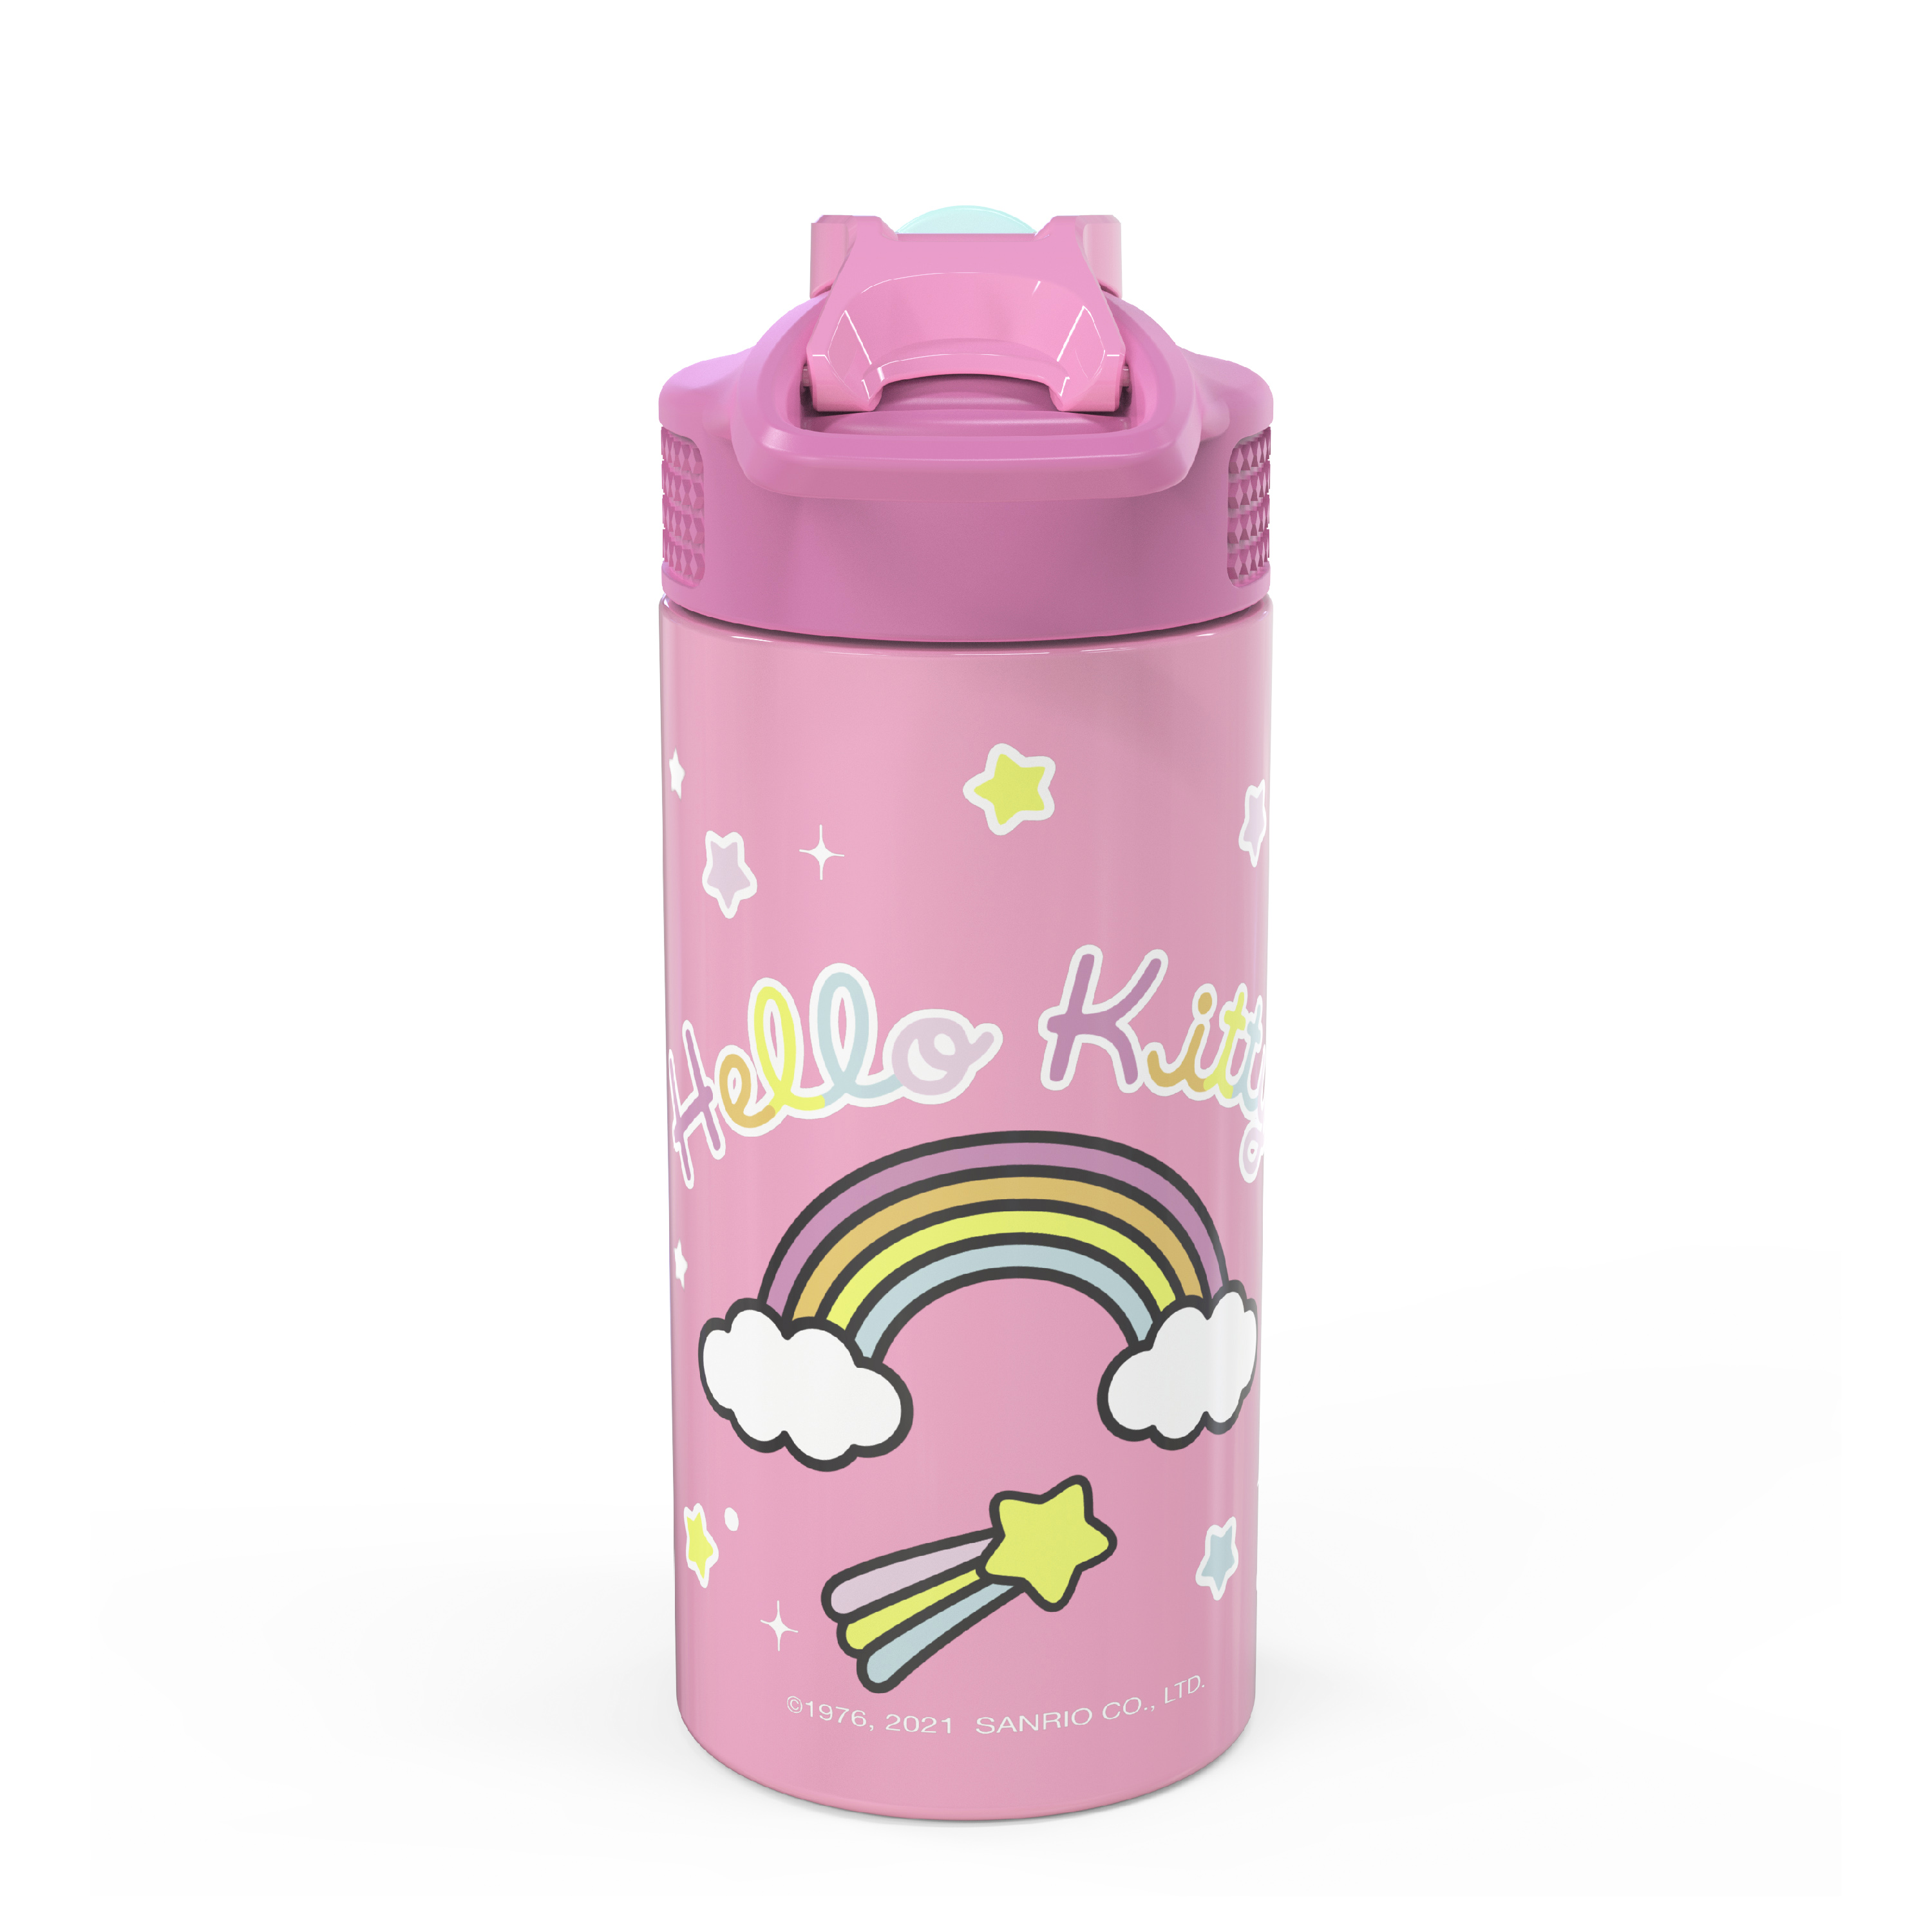 Sanrio 14 ounce Stainless Steel Vacuum Insulated Water Bottle, Hello Kitty slideshow image 6